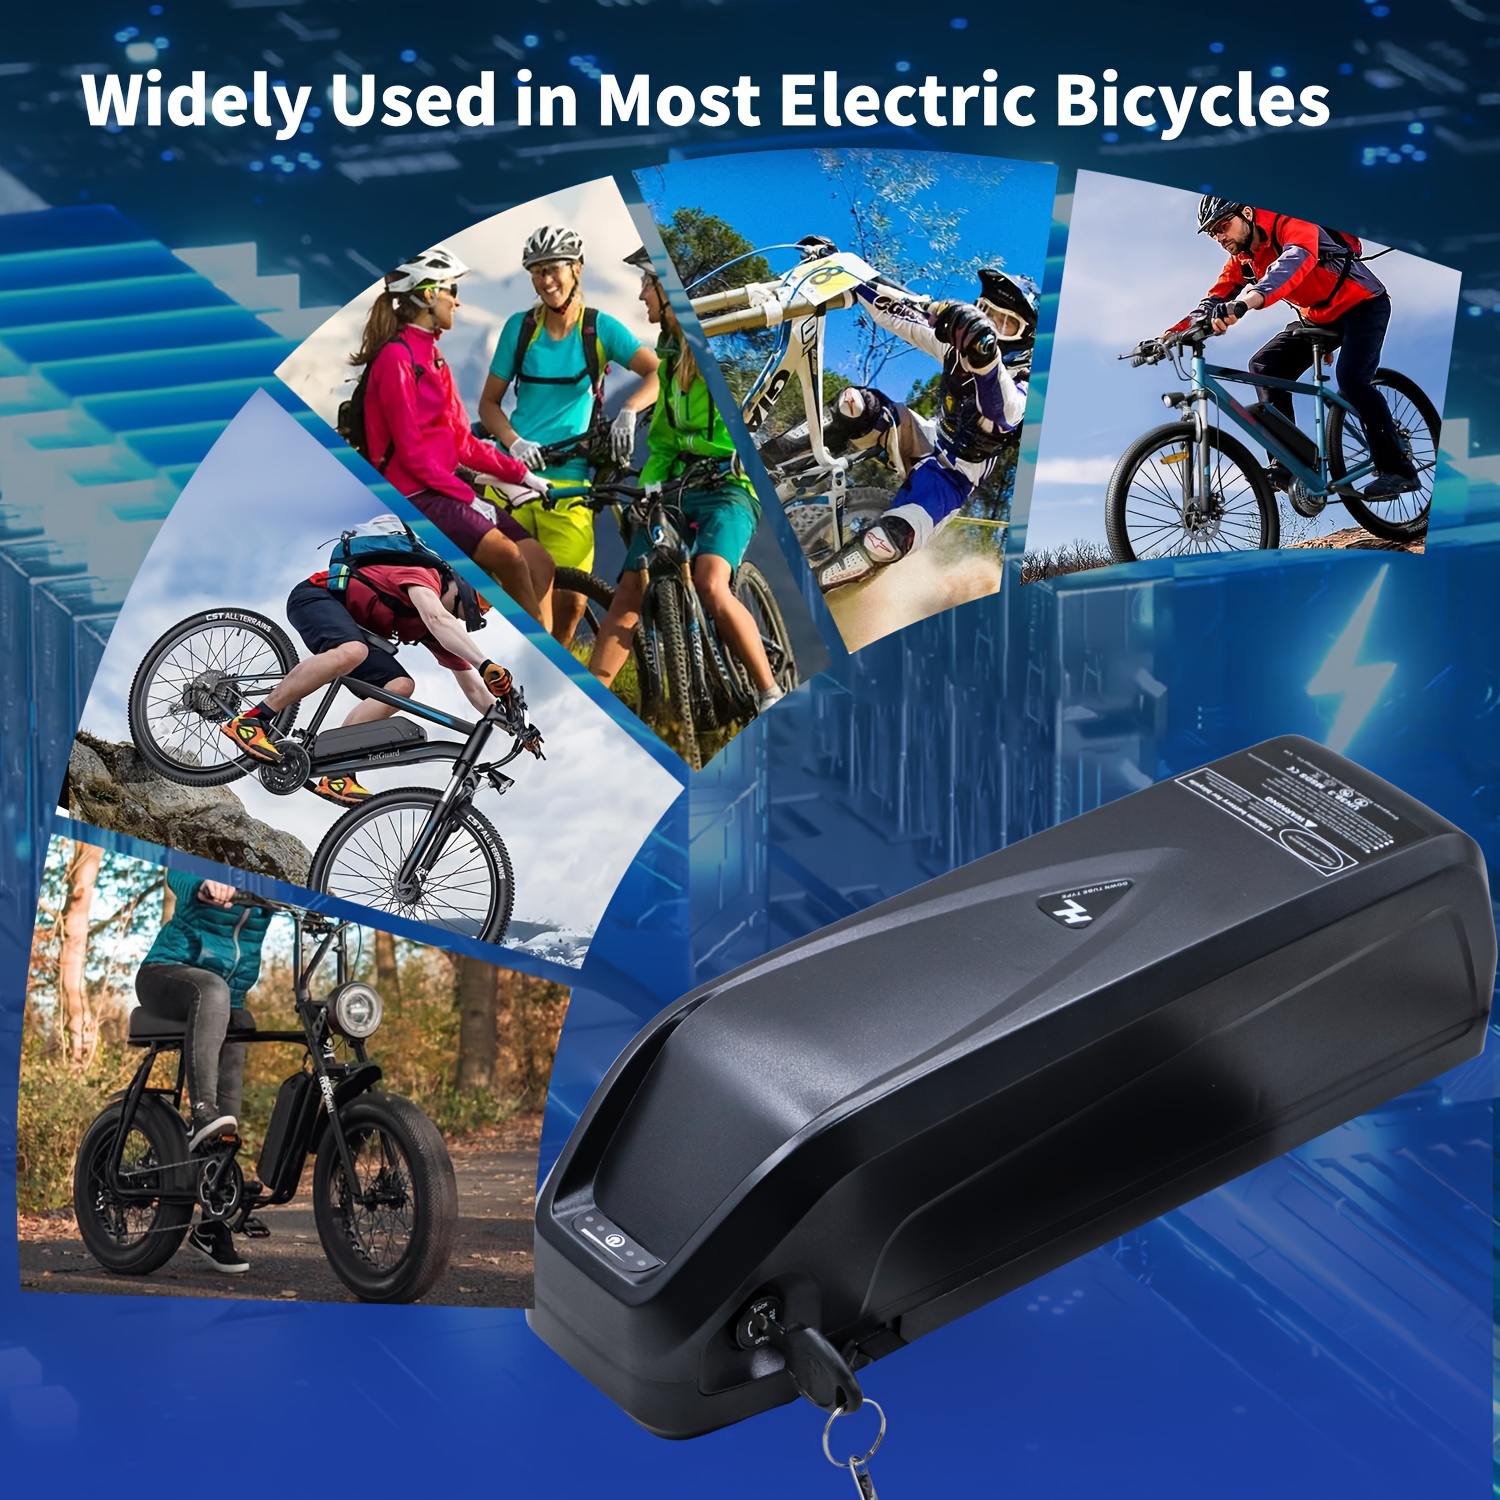 

48v20ah , Electric Bicycle, Battery Pack Lithium Battery, 5-pin Base, Suitable For 250w-1500w Mountain Bikes And Scooters, Free 2a Fast Charger And Bms, Indicator Light, Safety Lock For The Motor